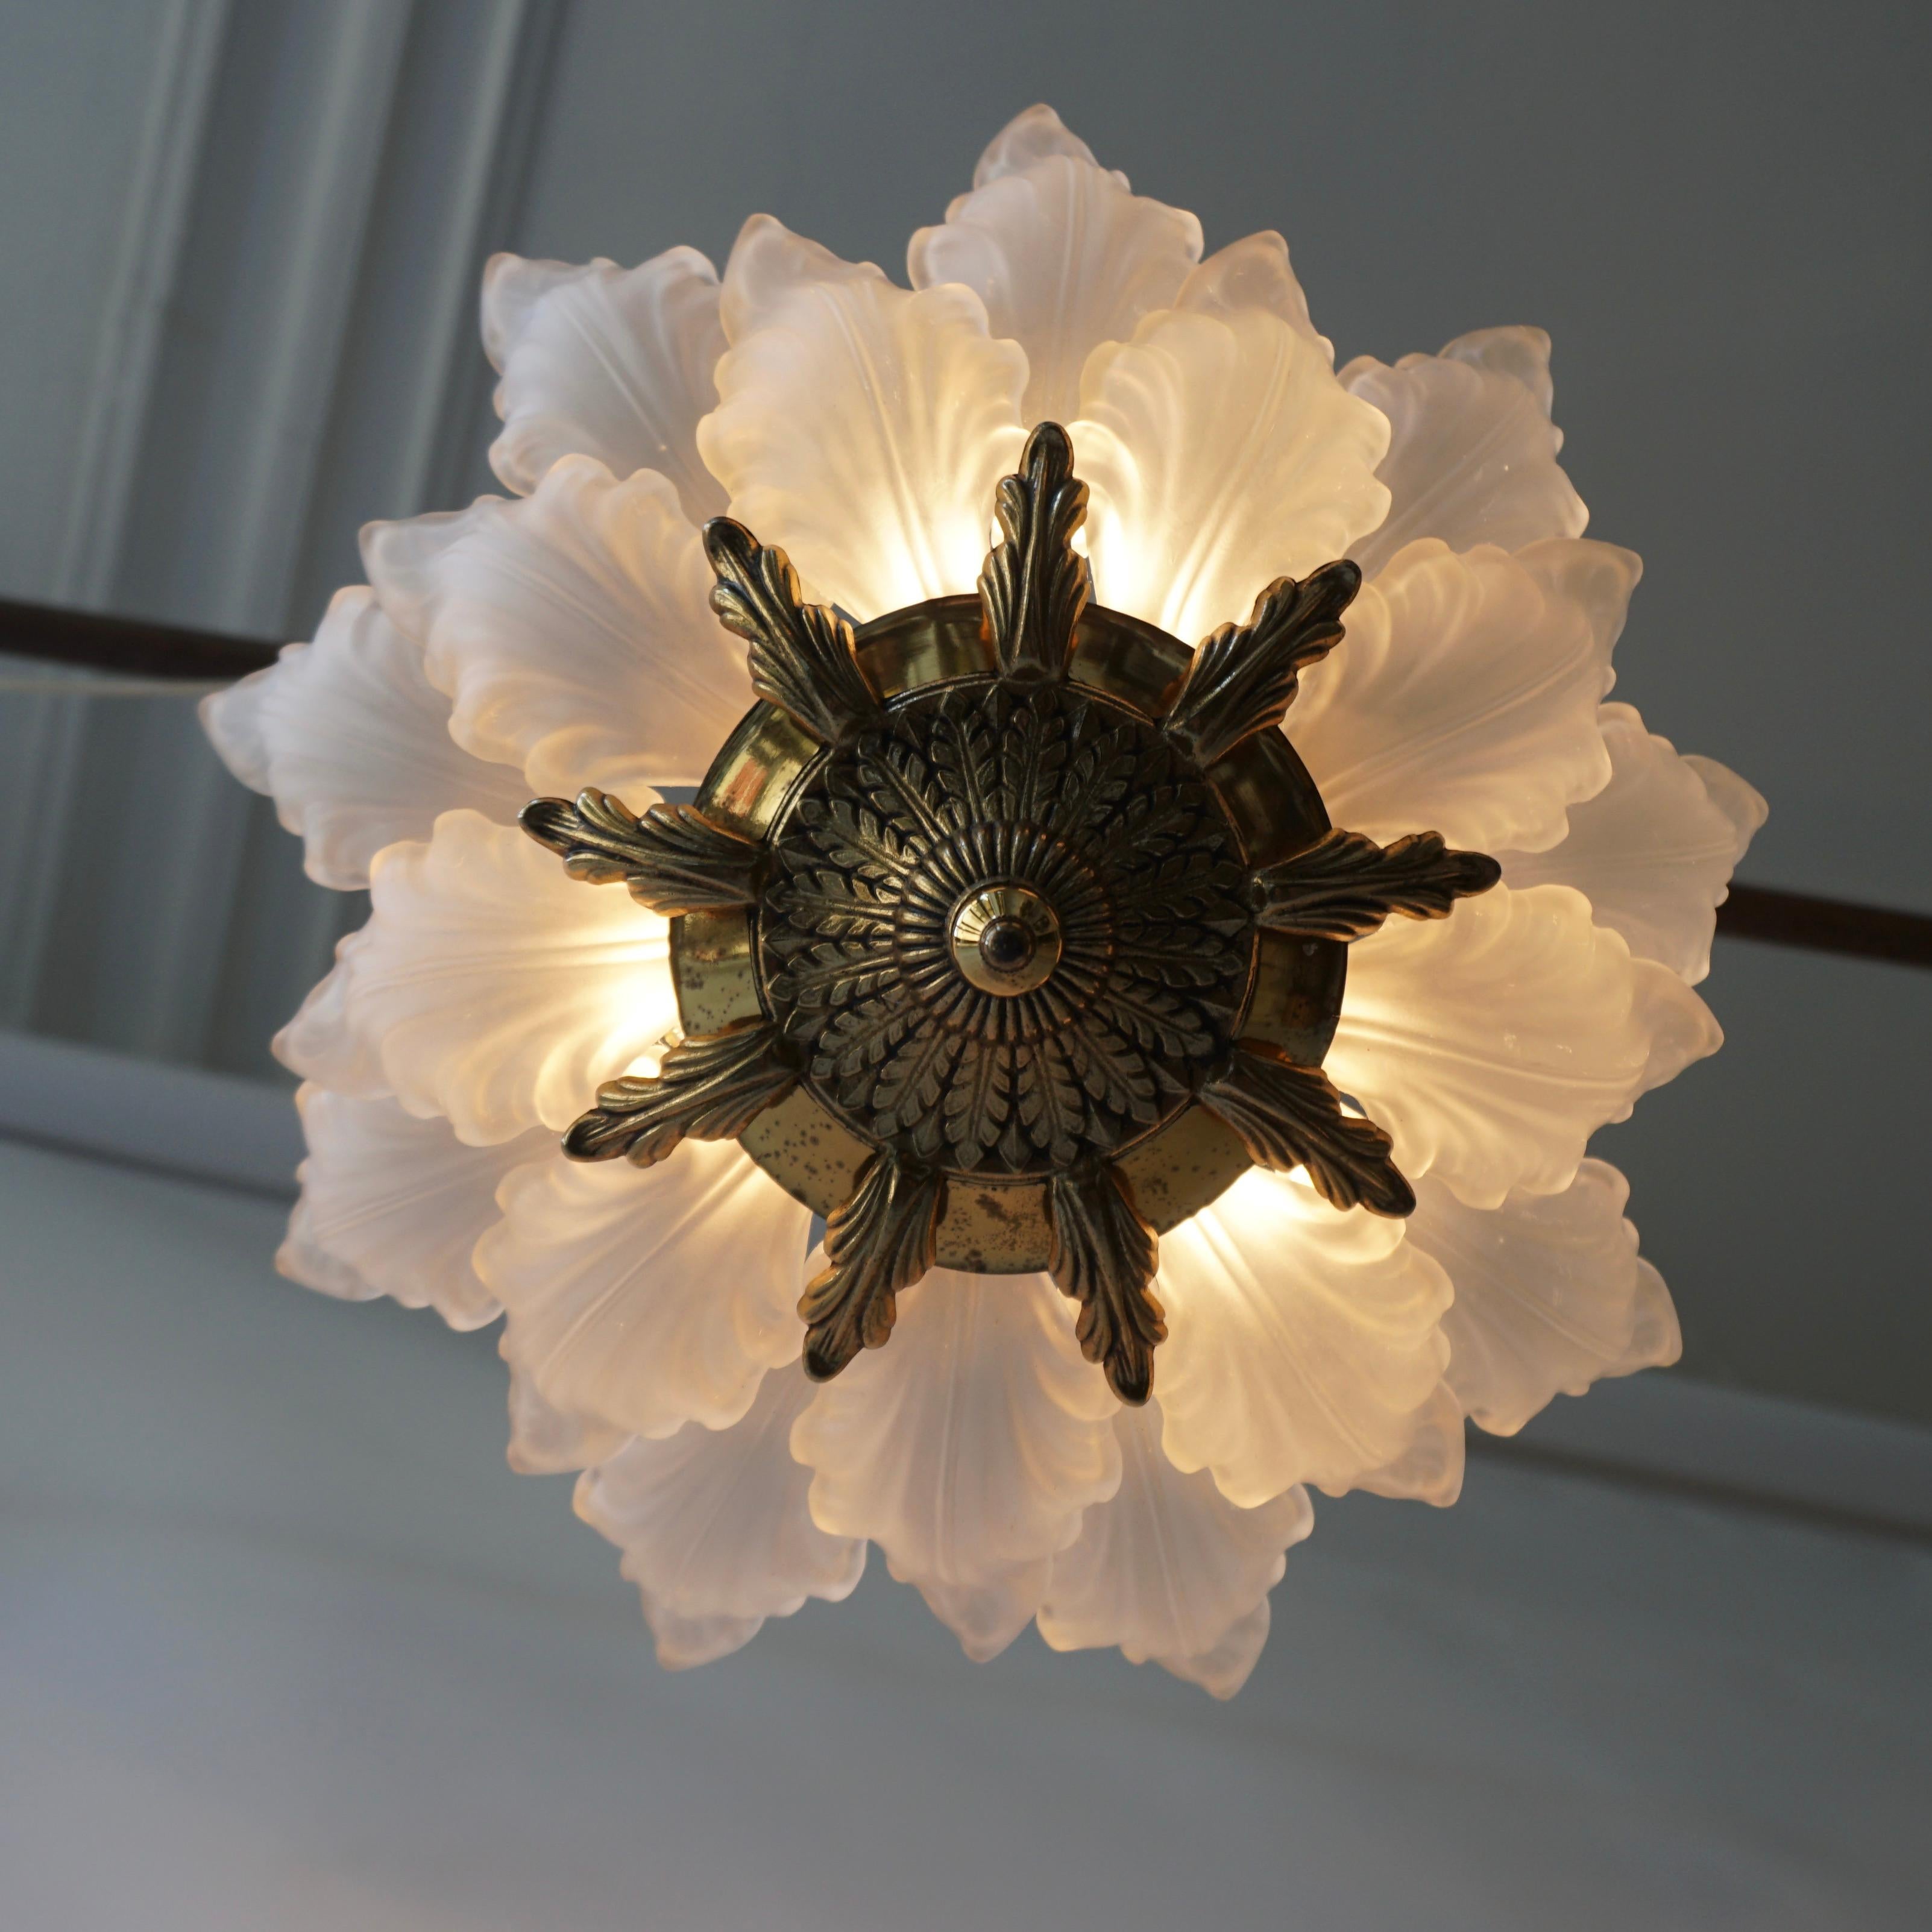 Art Nouveau style chandelier or flush mount - wall light with petal or shell shaped frosted glass and leaf design.

The light requires three single E27 screw fit lightbulbs (60Watt max.) LED compatible.

Measures: 
Diameter 39 cm 
Height 22